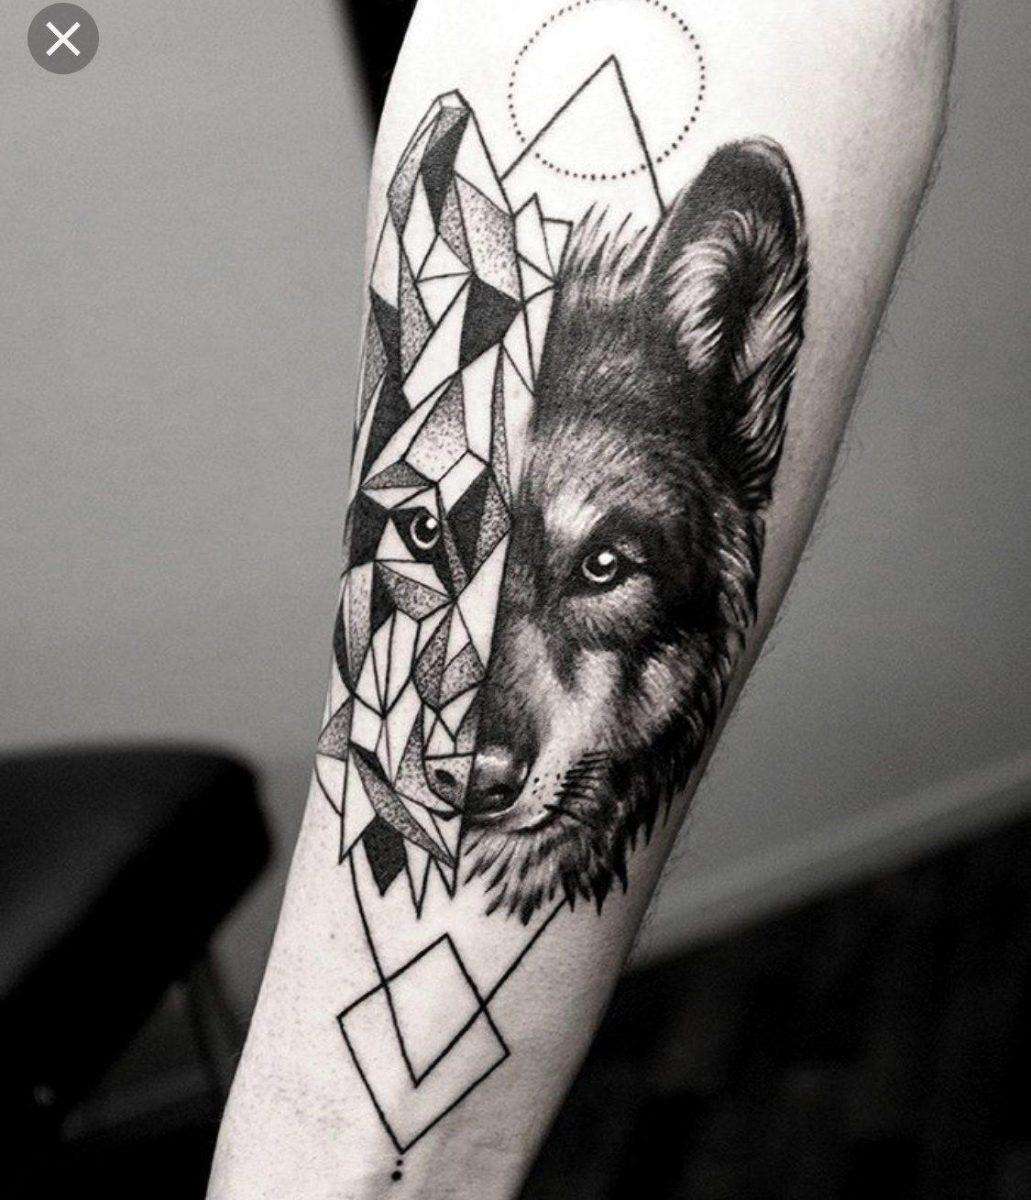 Animal tattoos for men, meanings and designs